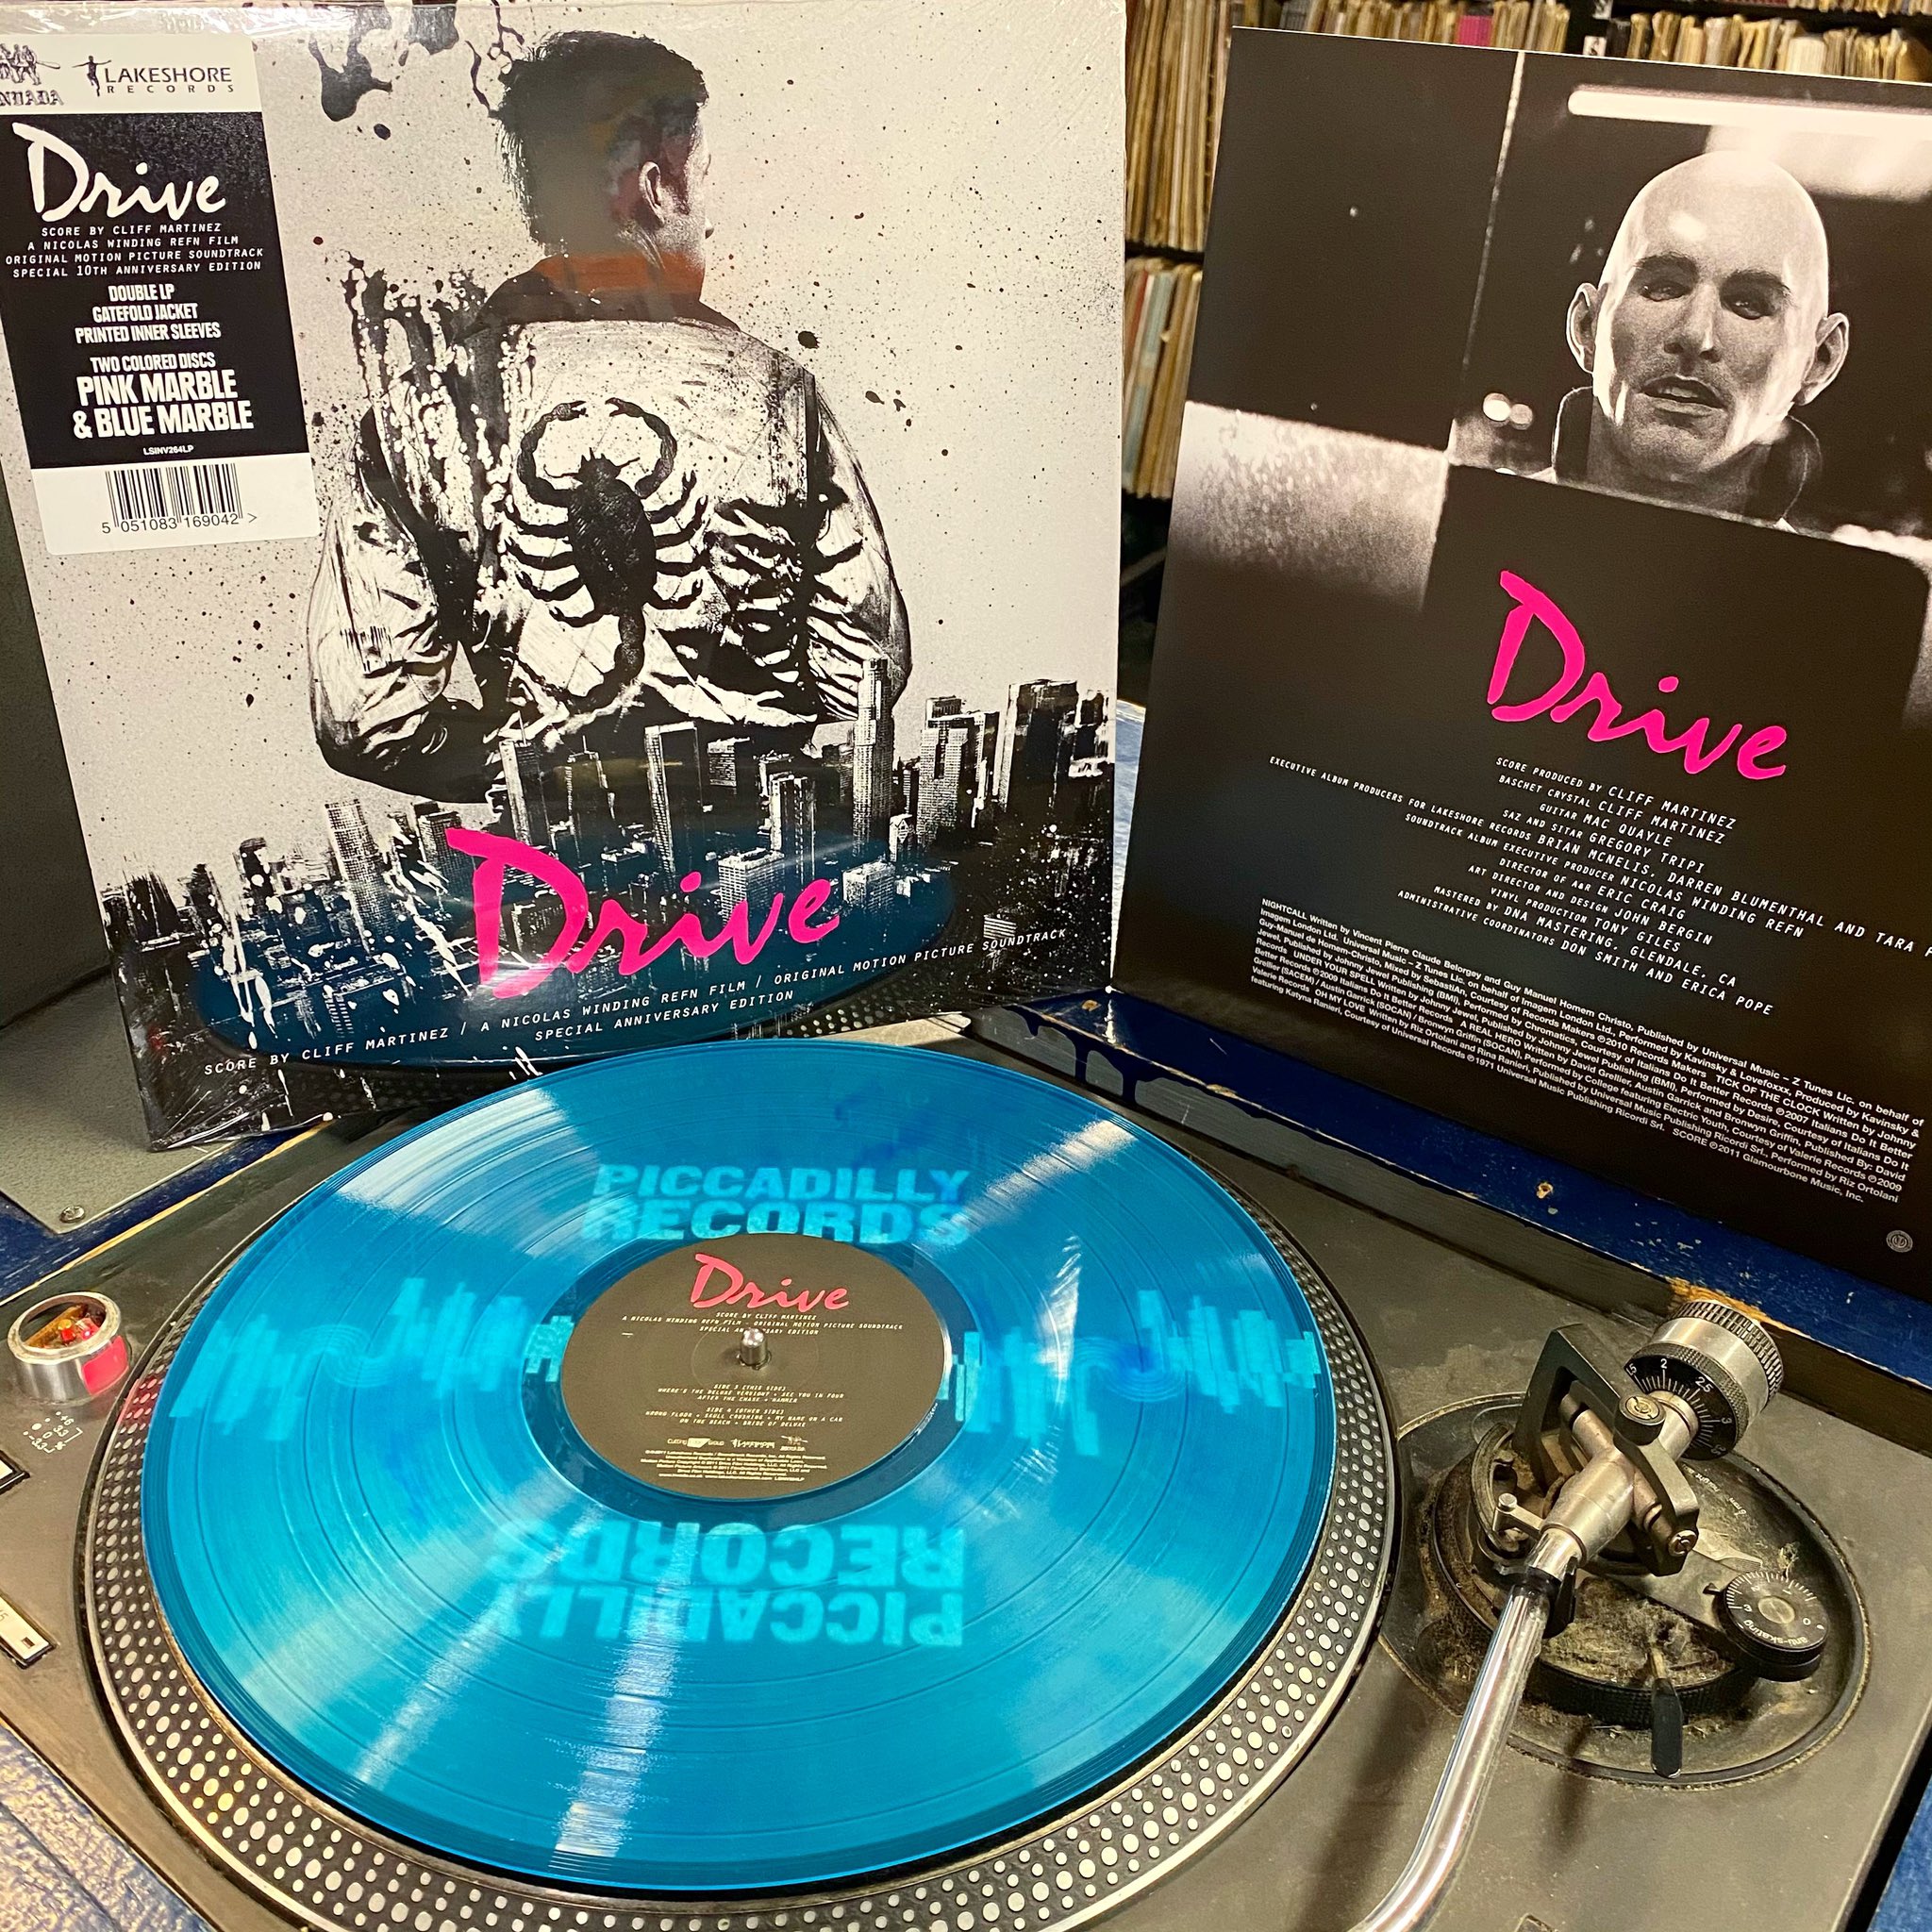 Klan Matematisk homoseksuel Piccadilly Records on Twitter: "🔵 BLUE MONDAY 🔵 The 10th anniversary to  the 'Drive' soundtrack landed last week featuring the legendary synth score  by Cliff Martinez. The album also features tracks by